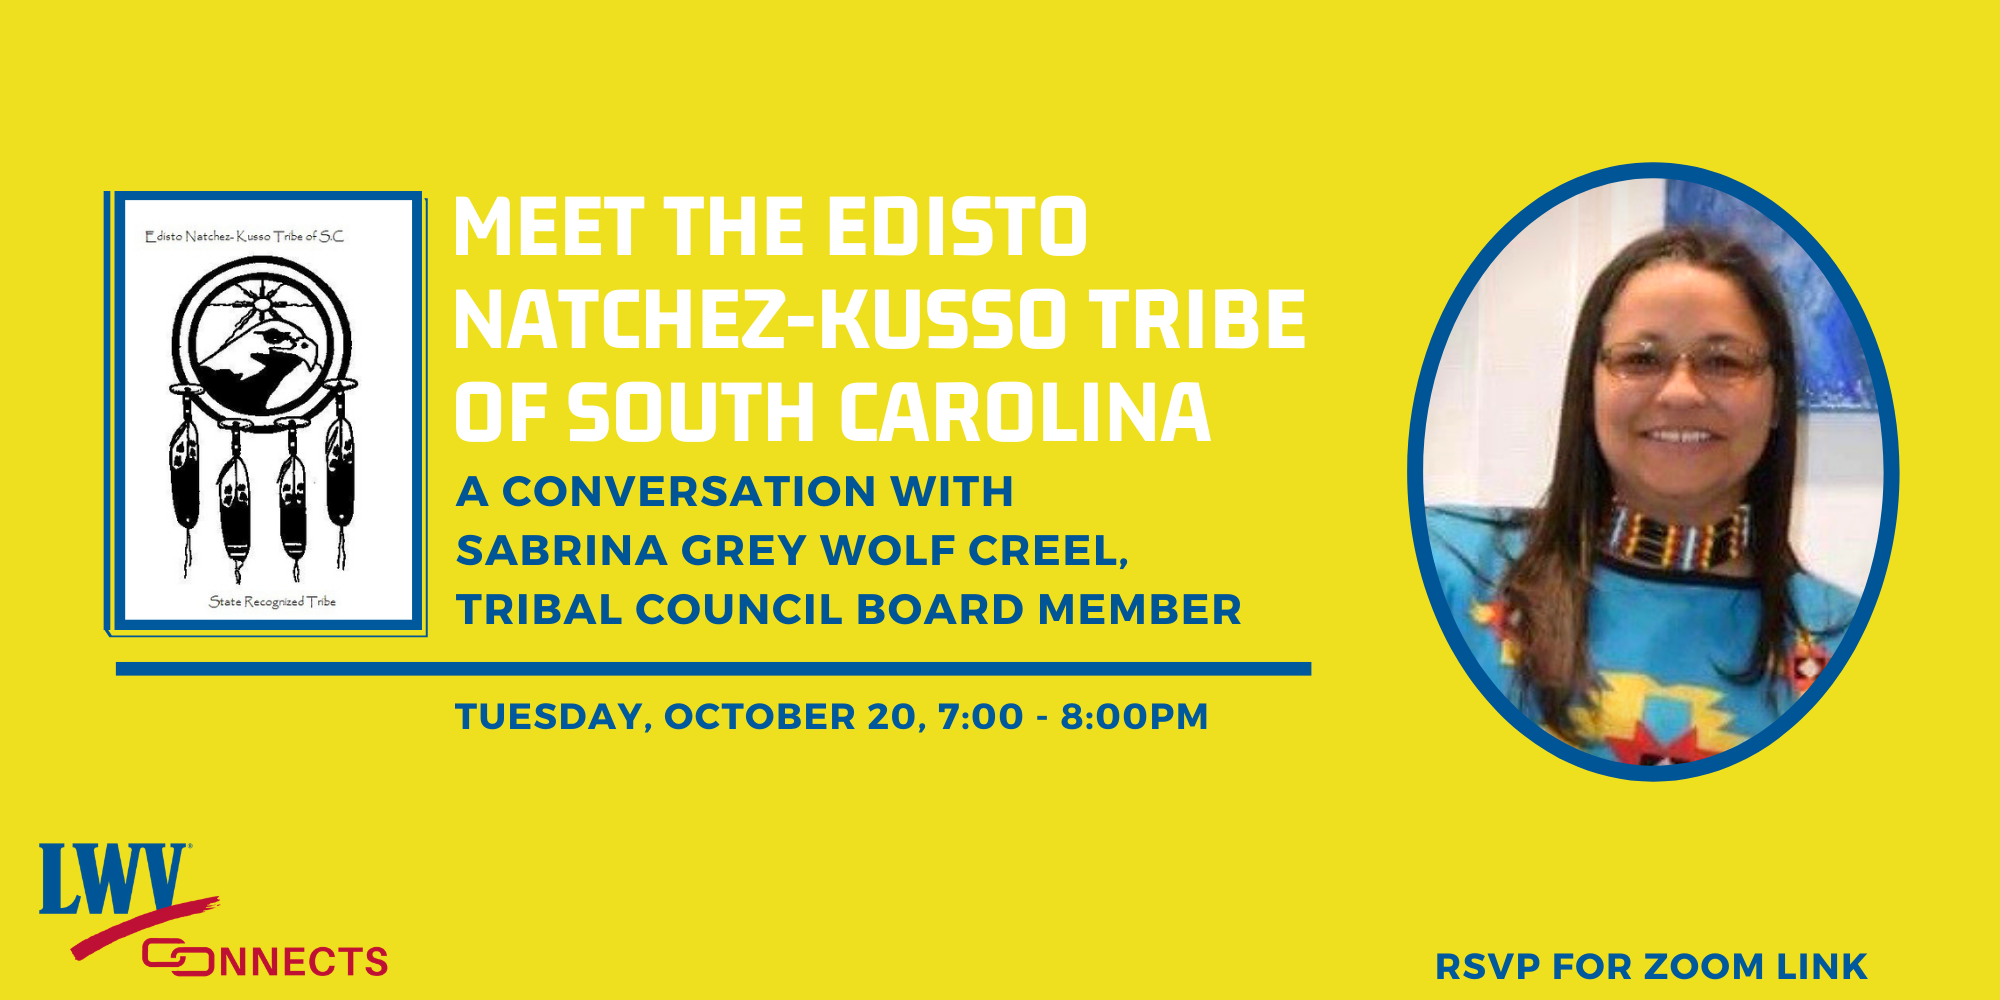 Virtual meeting with a council member for the Edisto Natchez-Kusso Tribe